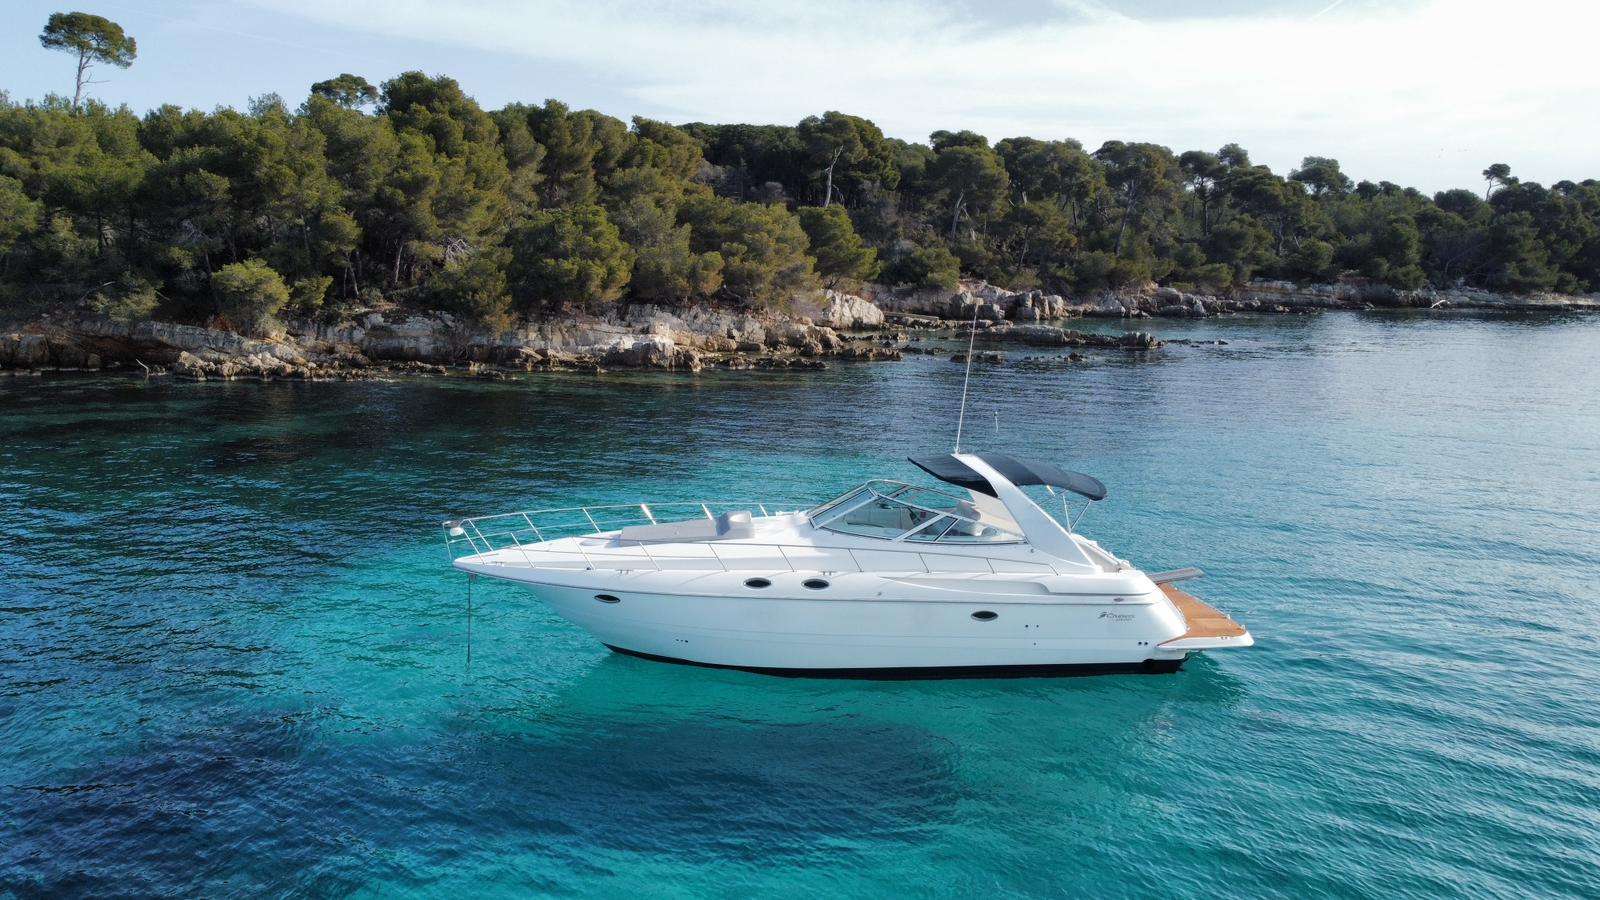 2005 - Yacht Charter Cannes & Boat hire in France French Riviera Cannes Vieux Port de Cannes 1